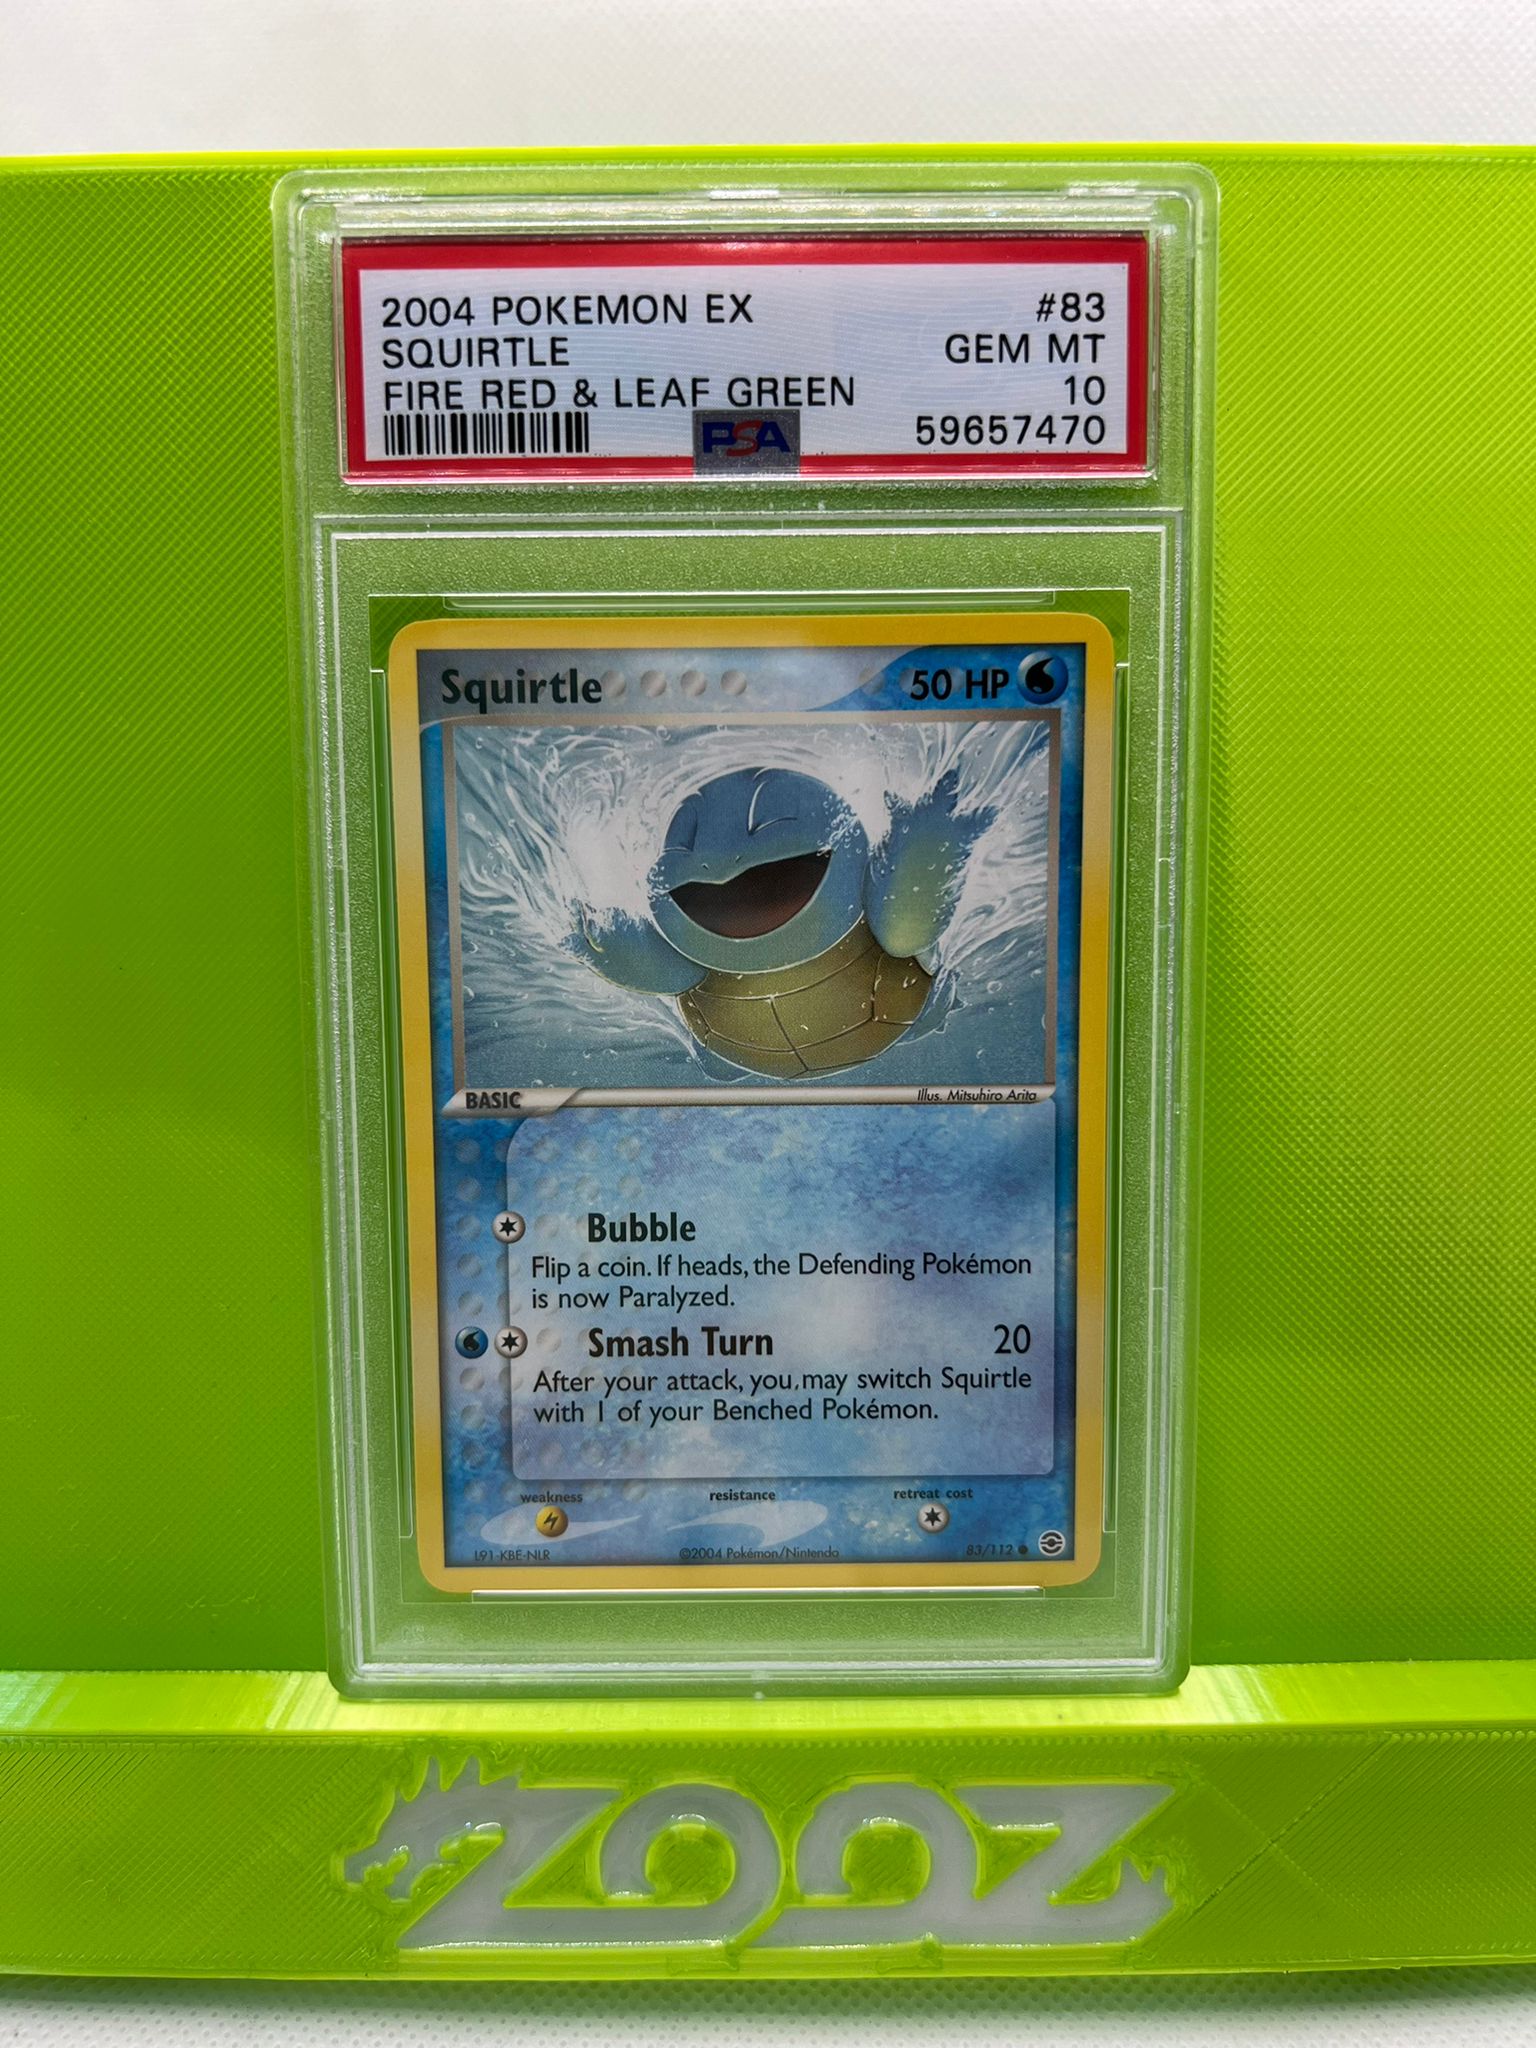 PSA 10 Pokemon EX Squirtle #83 Fire Red & Leaf Green